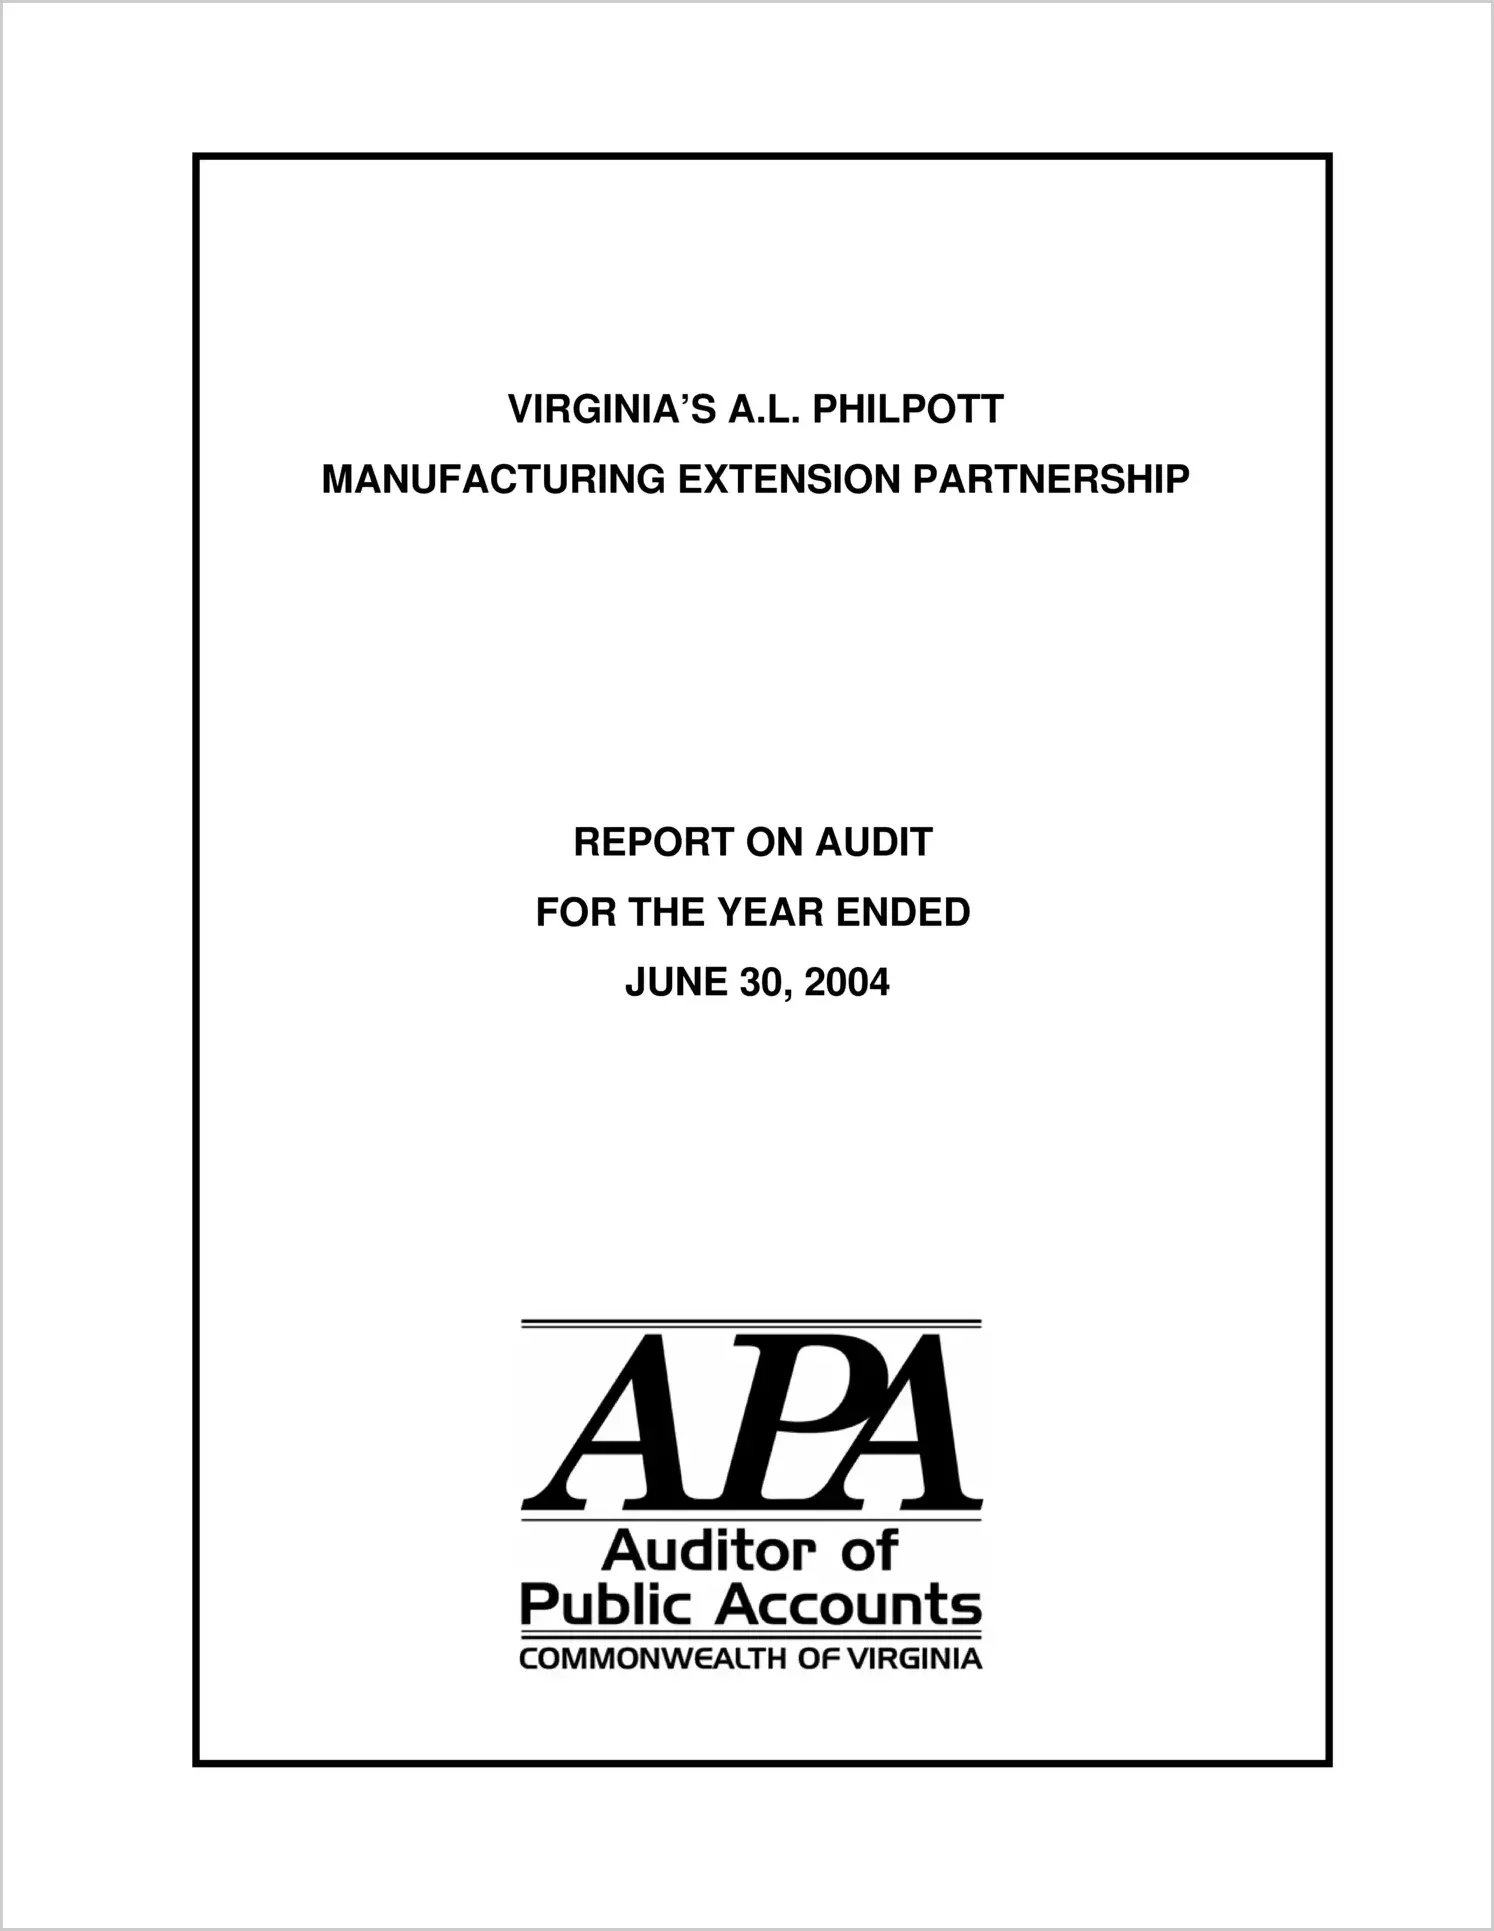 Virginia`s A. L. Philpott Manufacturing Extension Partnership for the year ended June 30, 2004